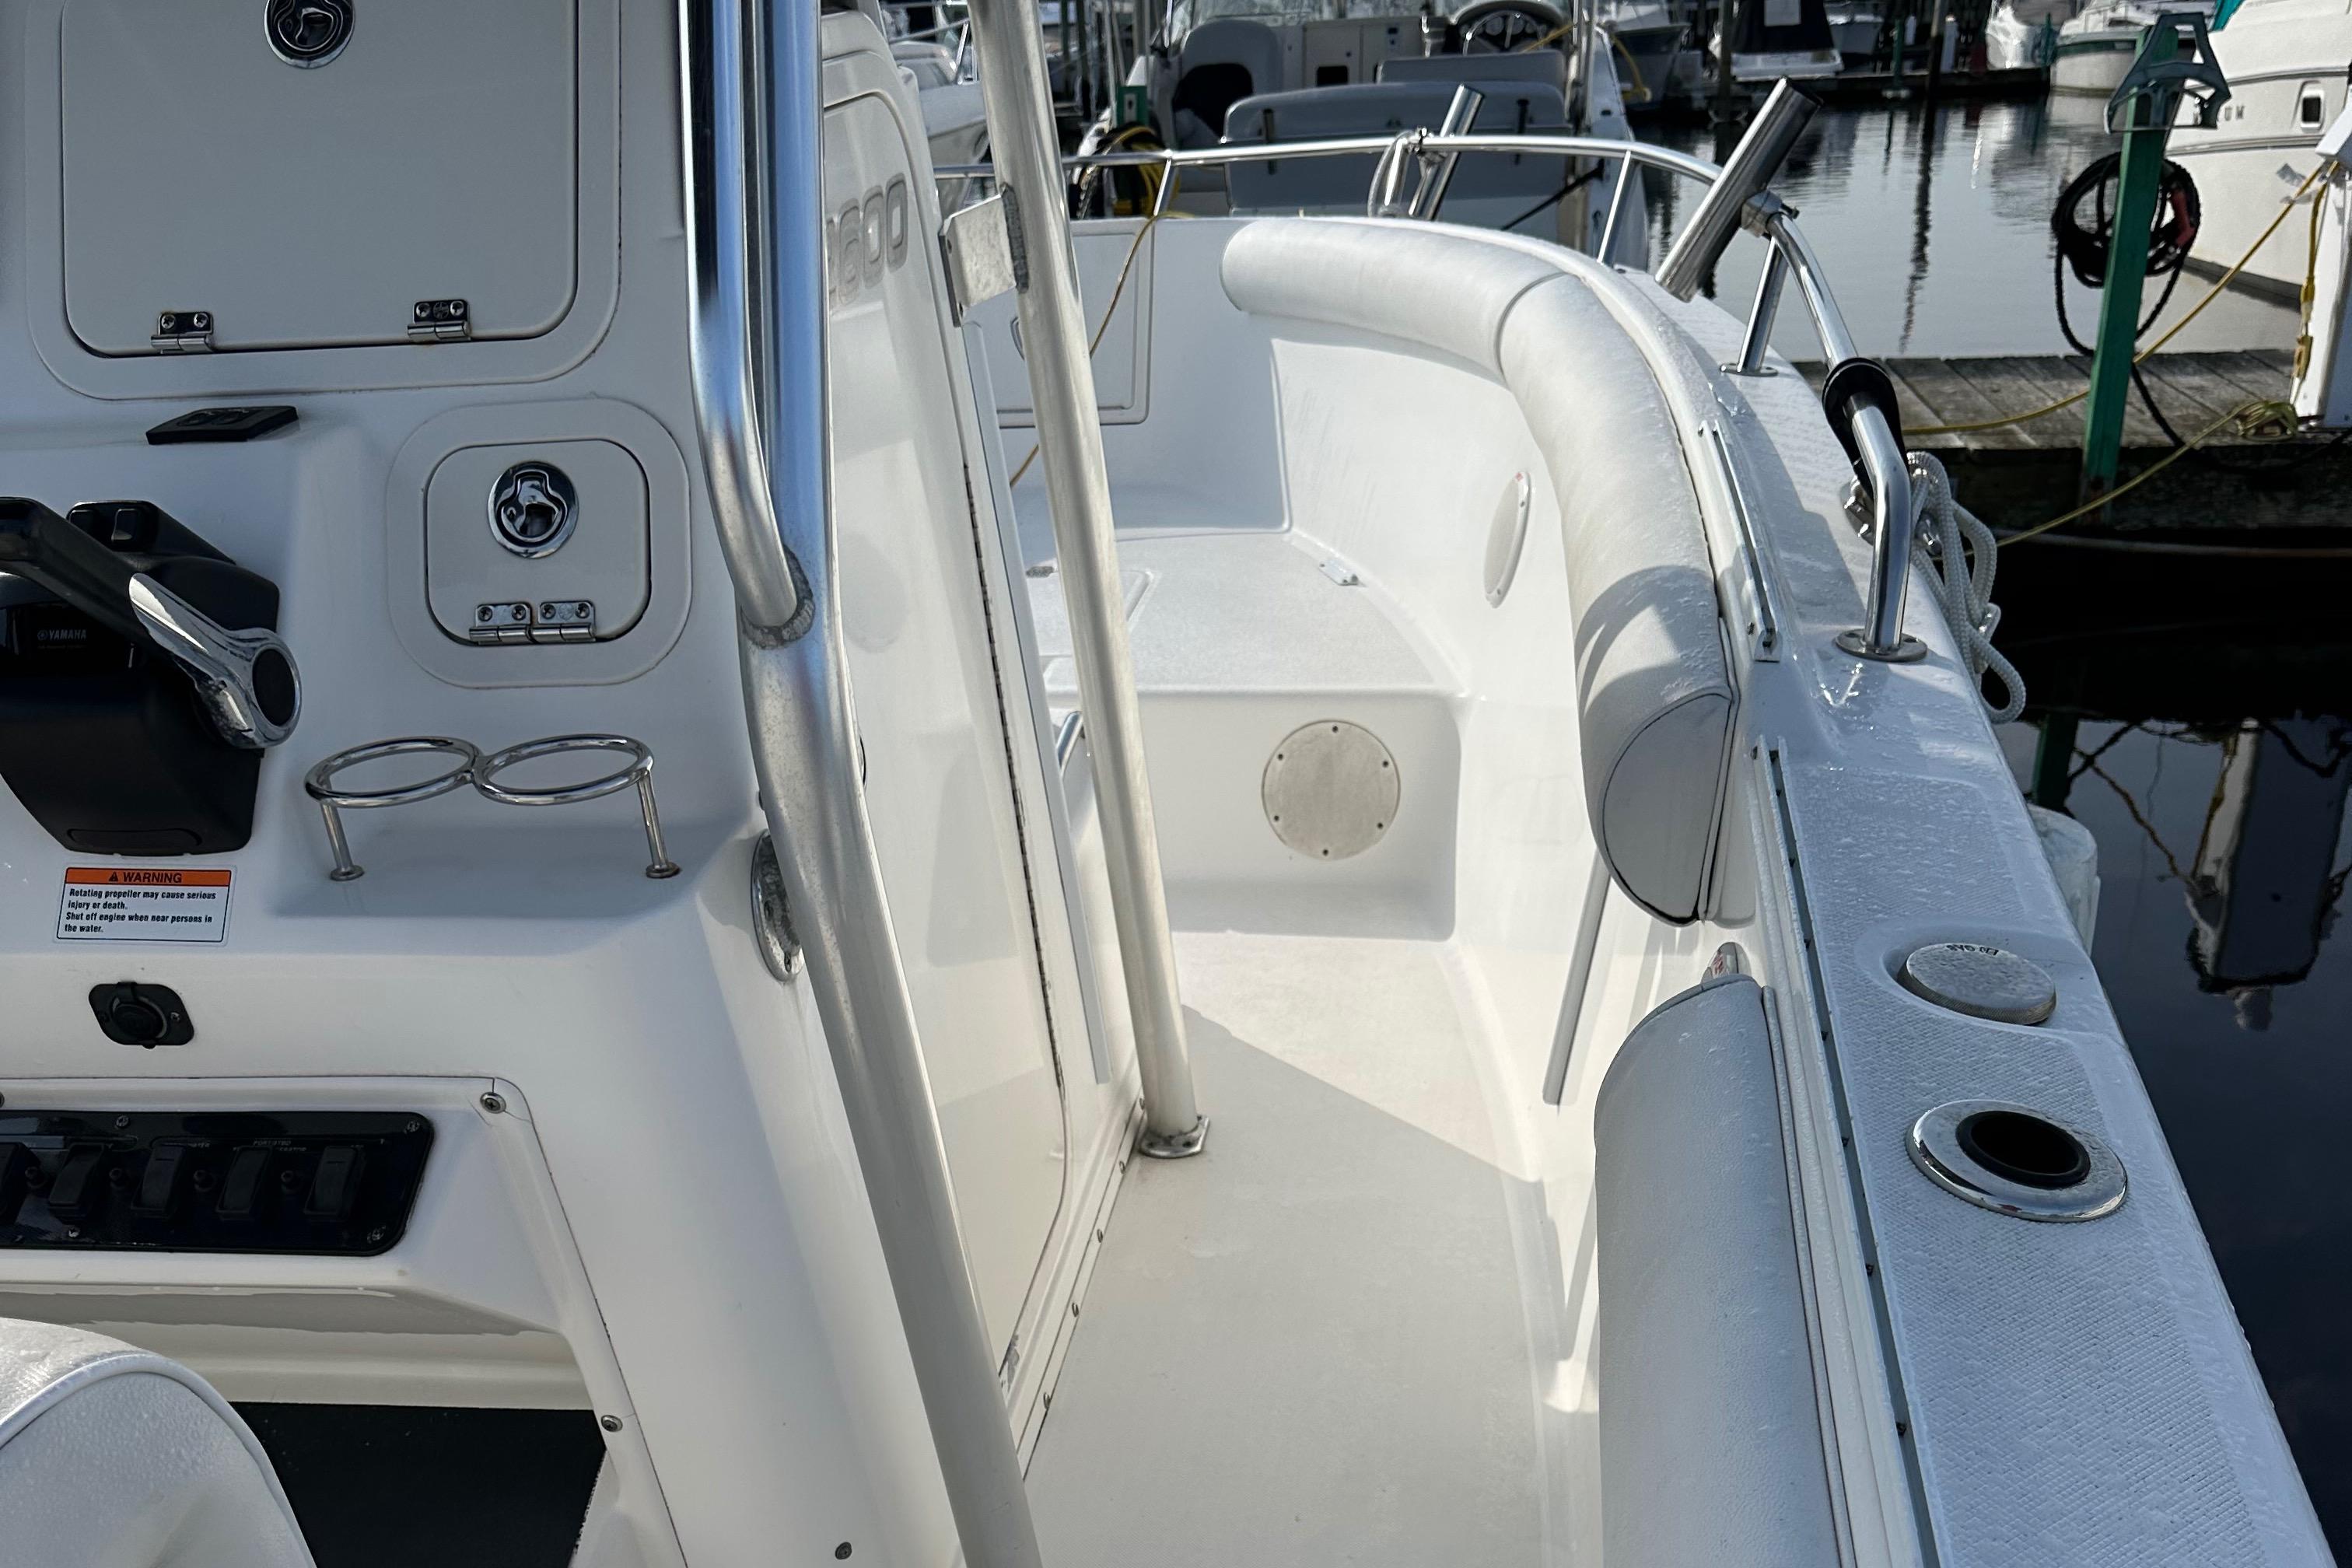 2600 CENTER CONSOLE, Power Fishing Boats